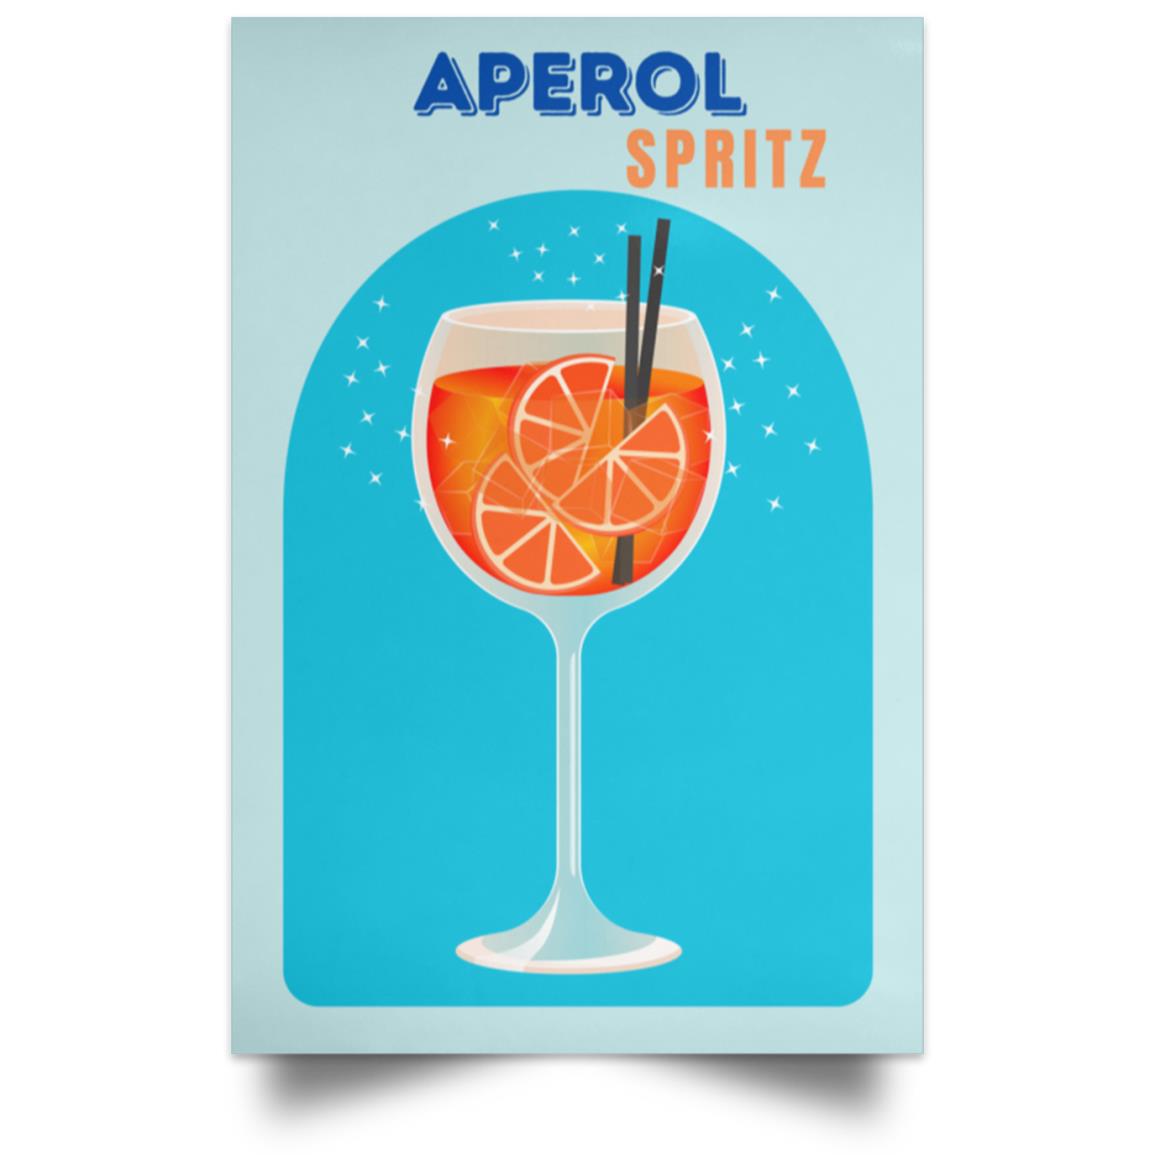 Get trendy with Aperol Spritz Aperol Spritz - Housewares available at Good Gift Company. Grab yours for $6.75 today!